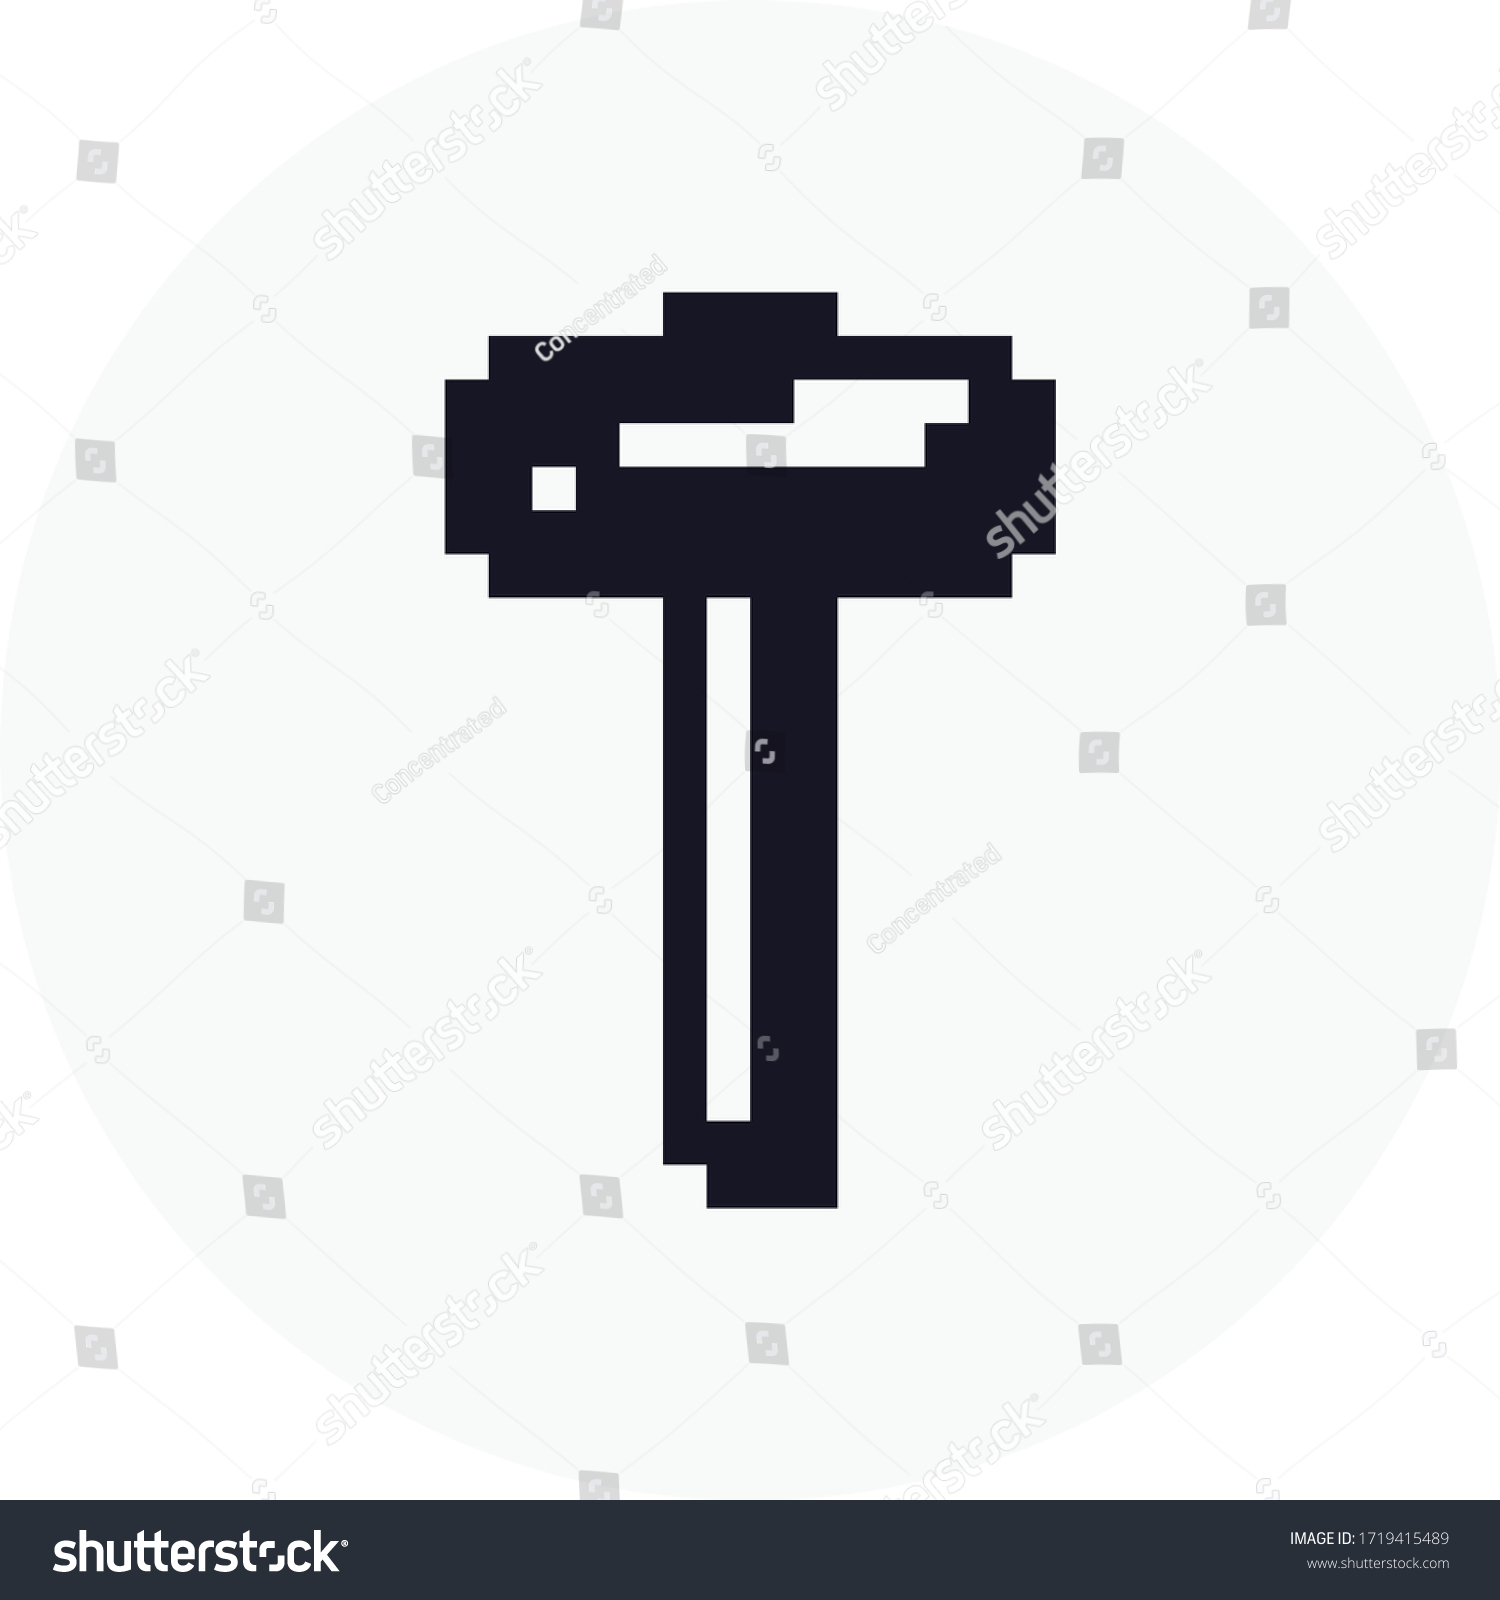 SVG of Hammer Icon, pixel perfect vector design. Great for mobile, web design, game, etc. svg